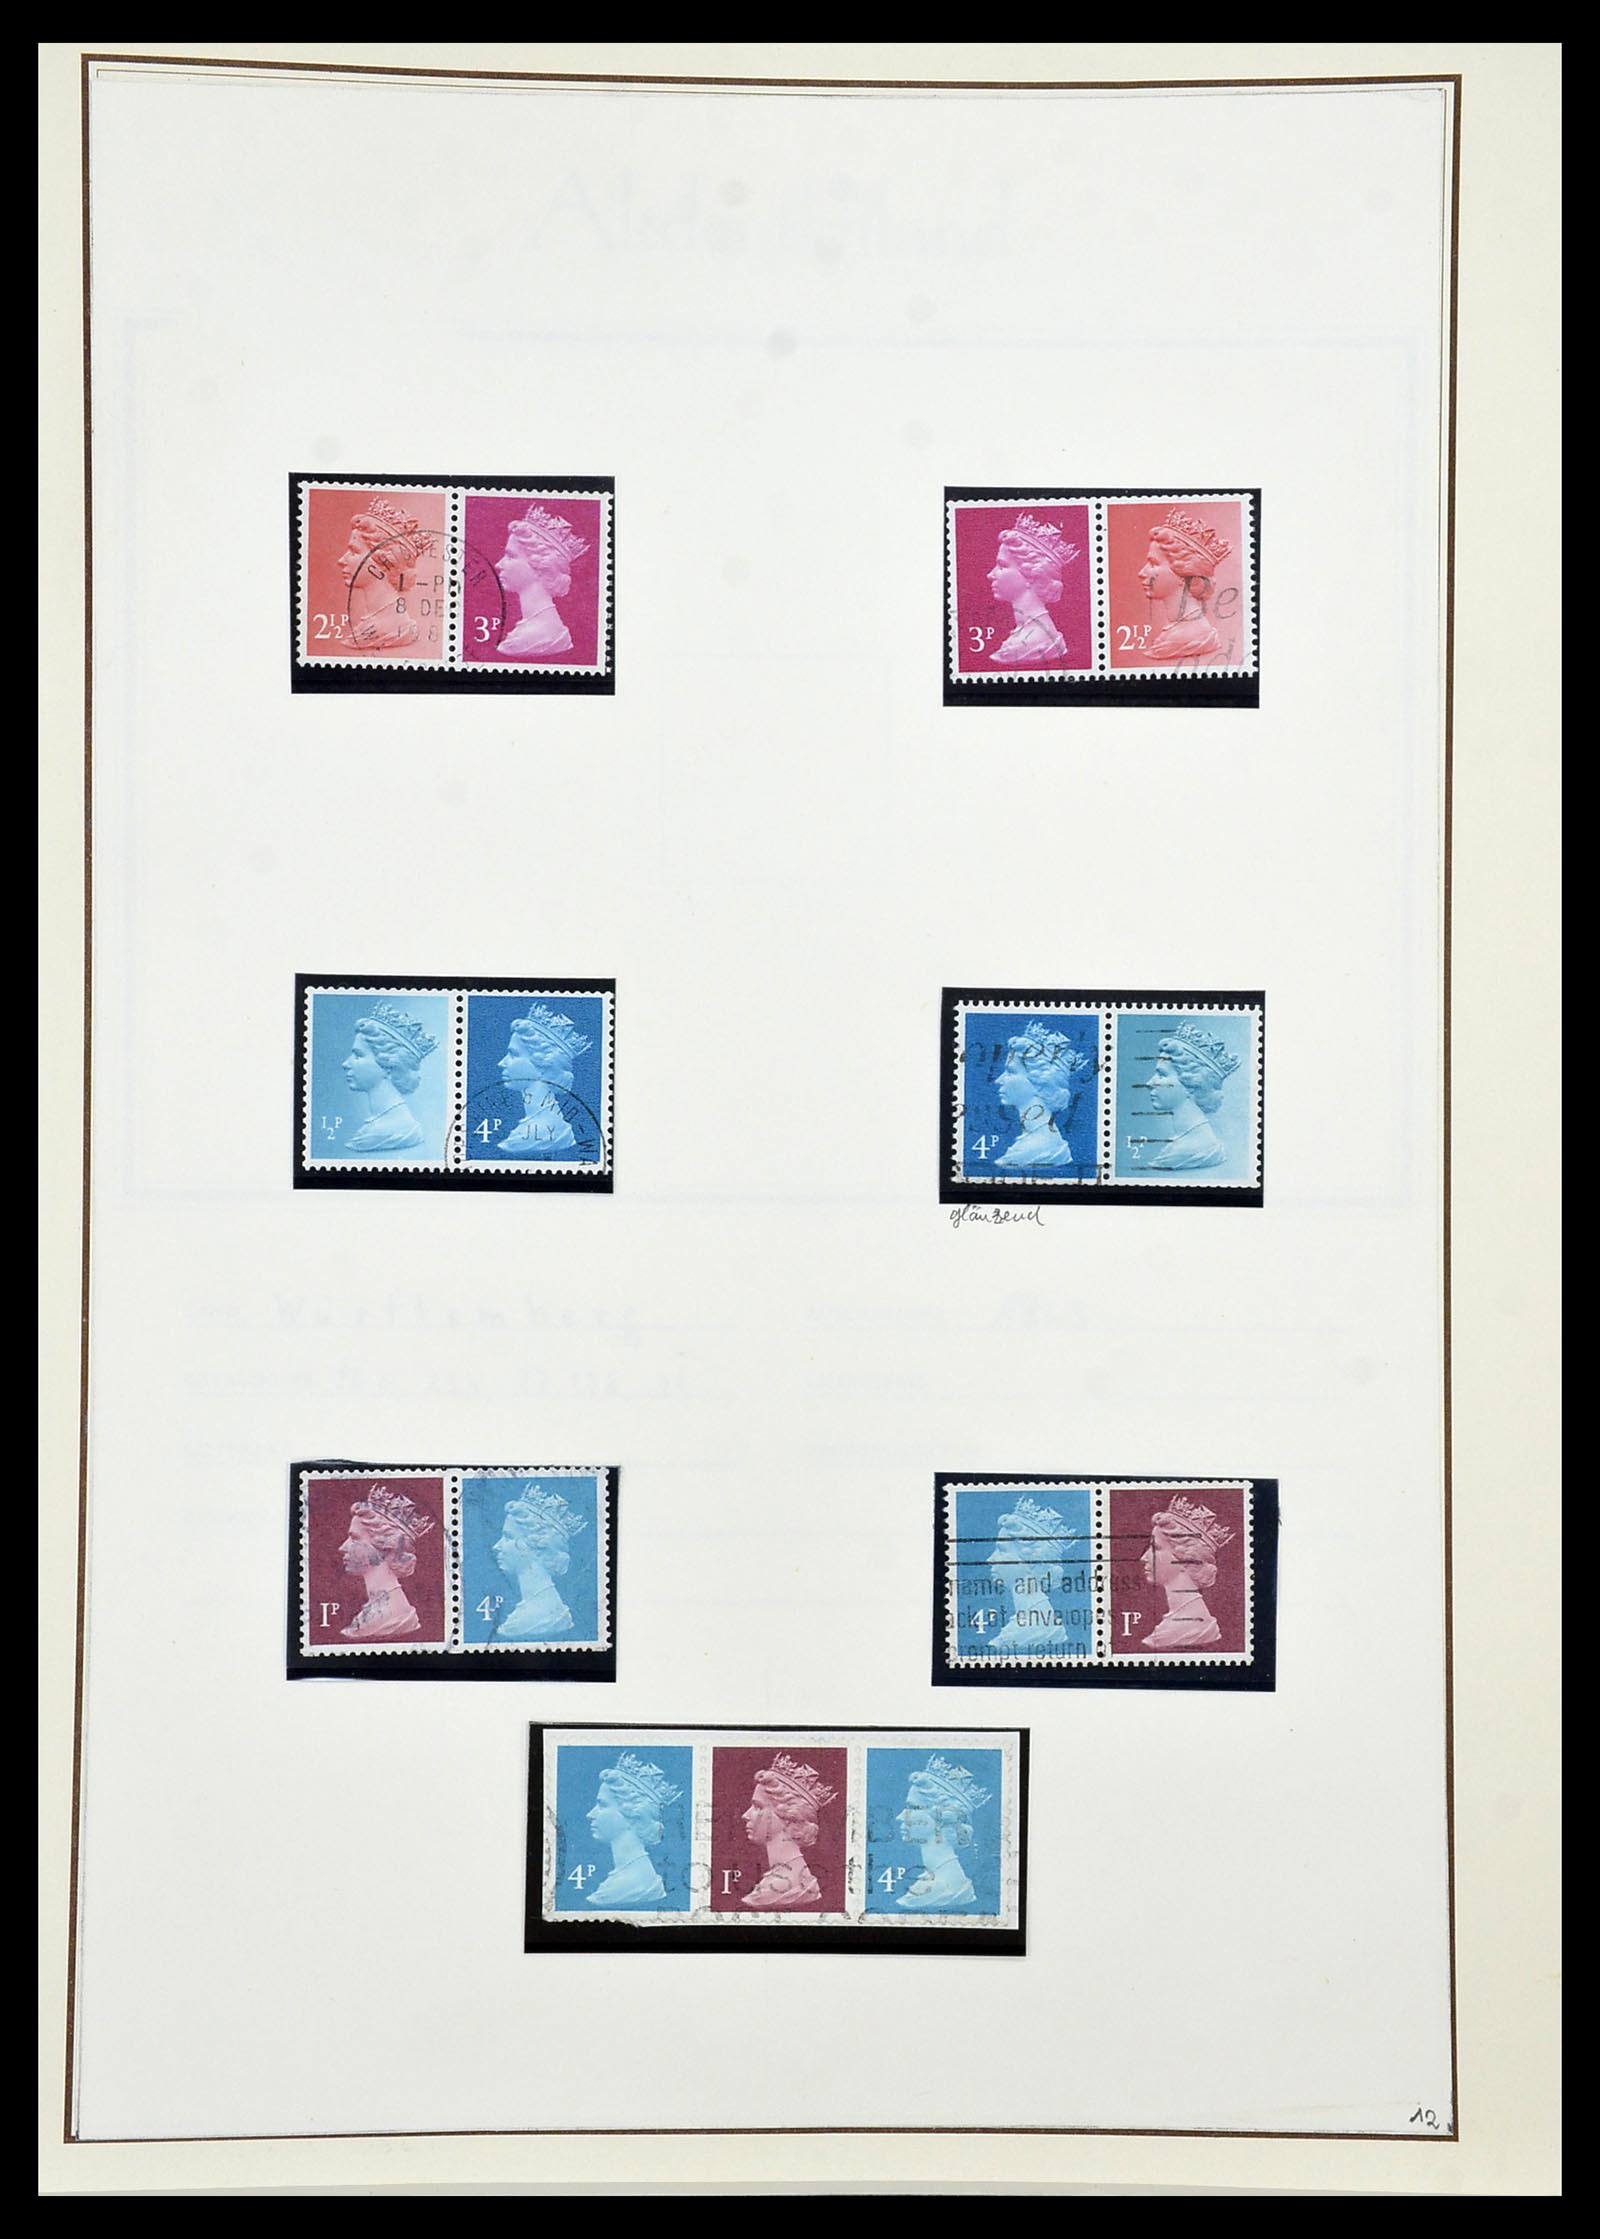 34221 189 - Stamp collection 34221 Great Britain Machins/castles 1971-2005.